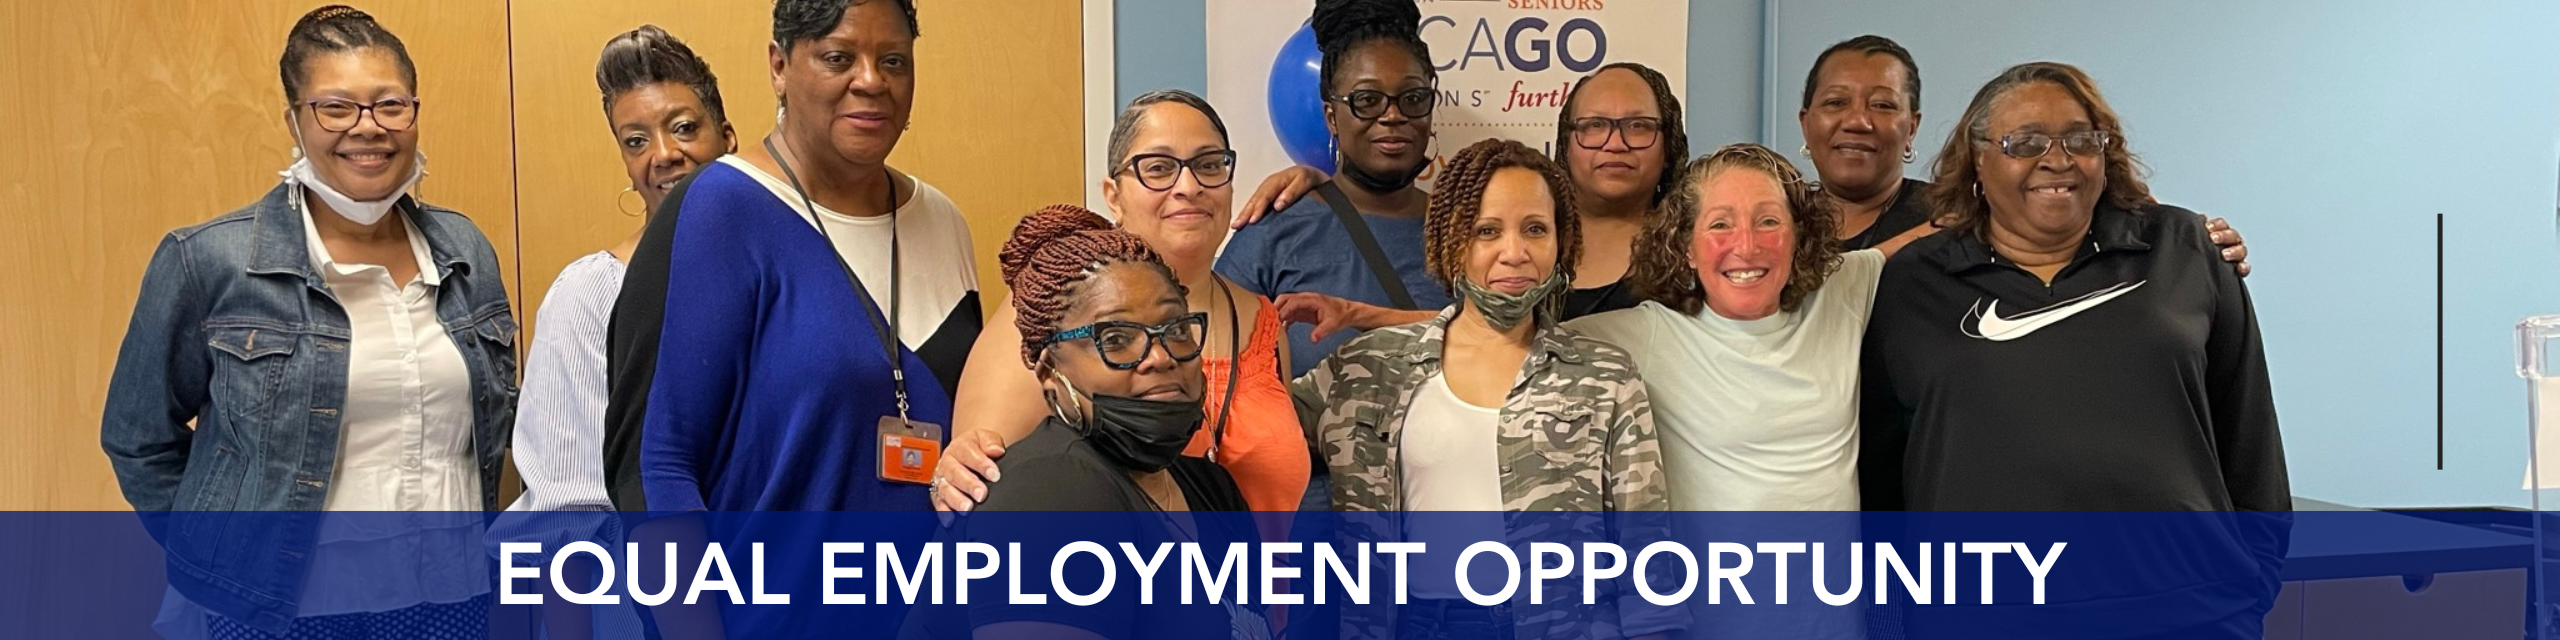 Chicago Commons Equal Employment Opportunity